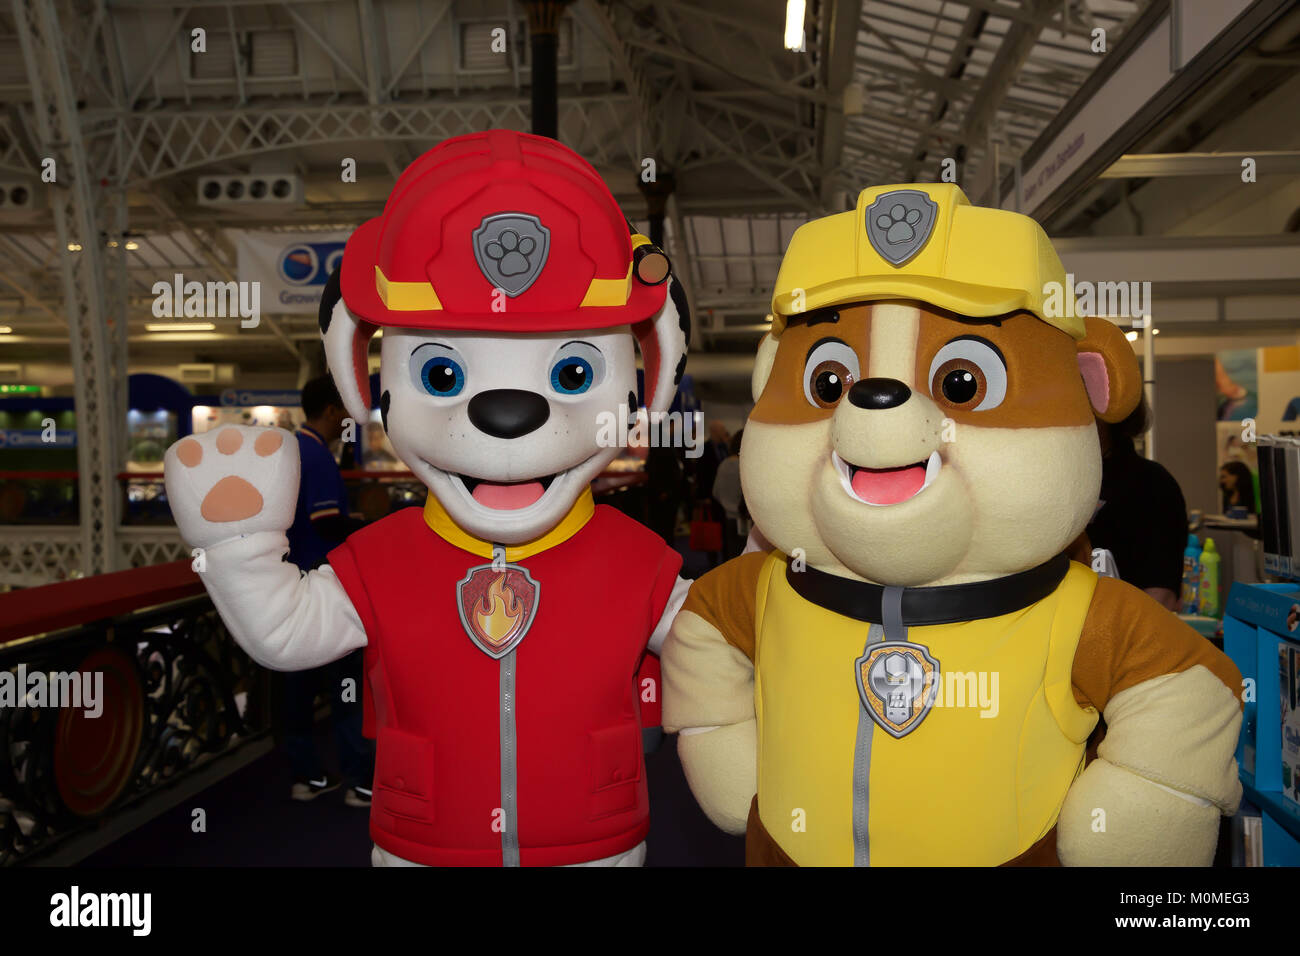 London, UK. 23rd Jan, 2018. Fireman Paw Patrol attend The Toy Fair in Olympia as it underway, this annual event is the UK'S largest trade event over 270 companies exhibiting